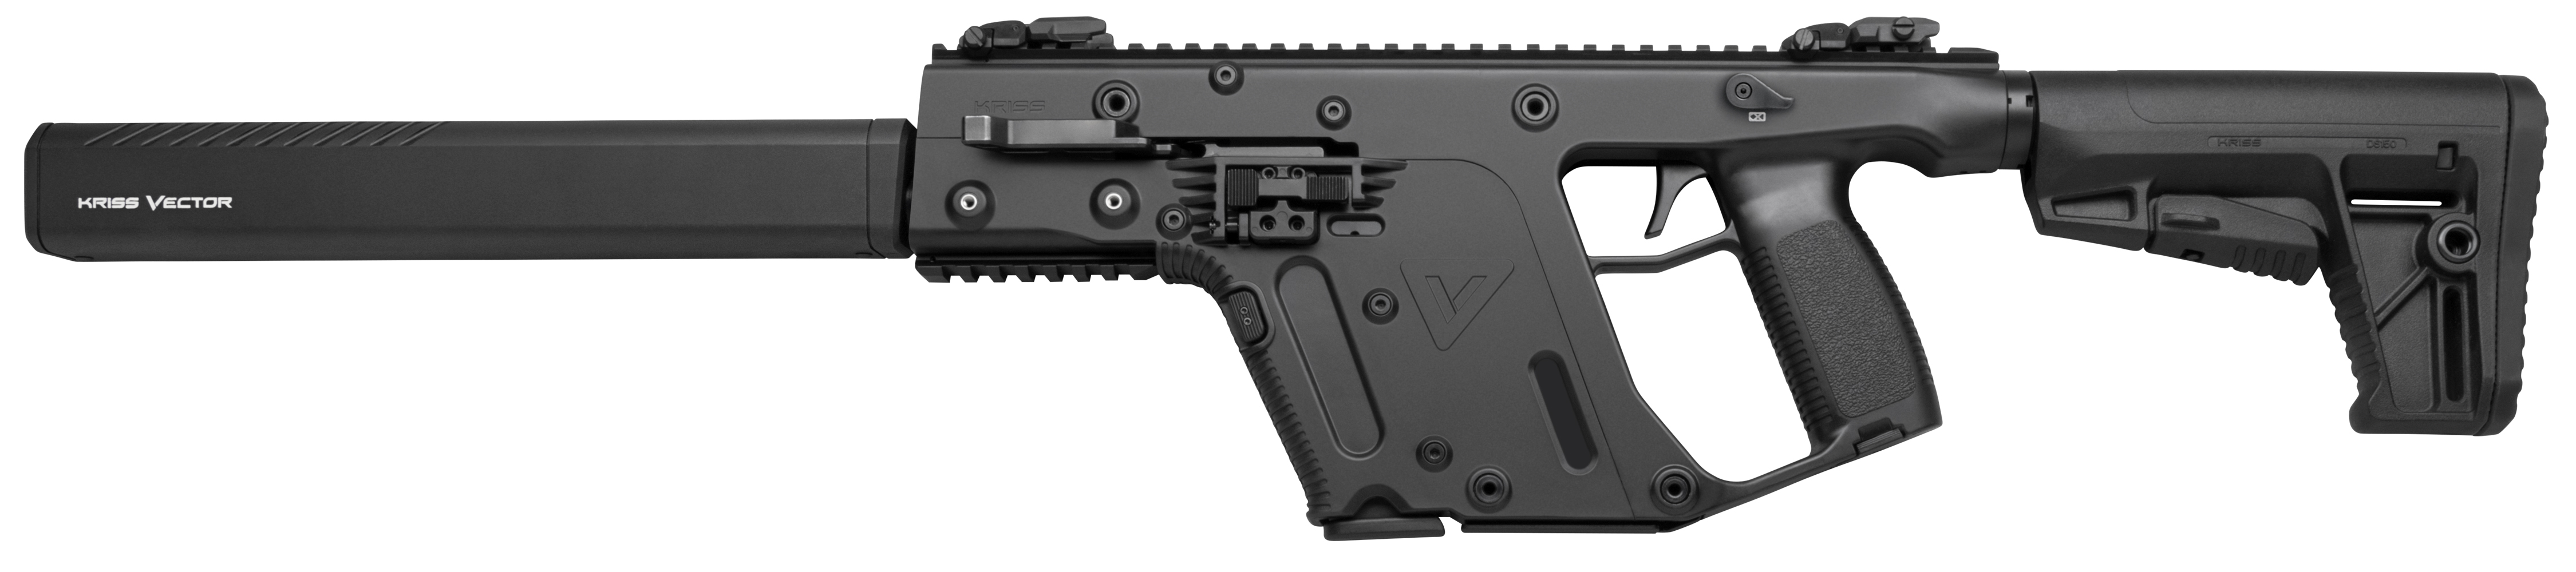 KRISS VECTOR CRB G2 40SW 16" BLK 15RD